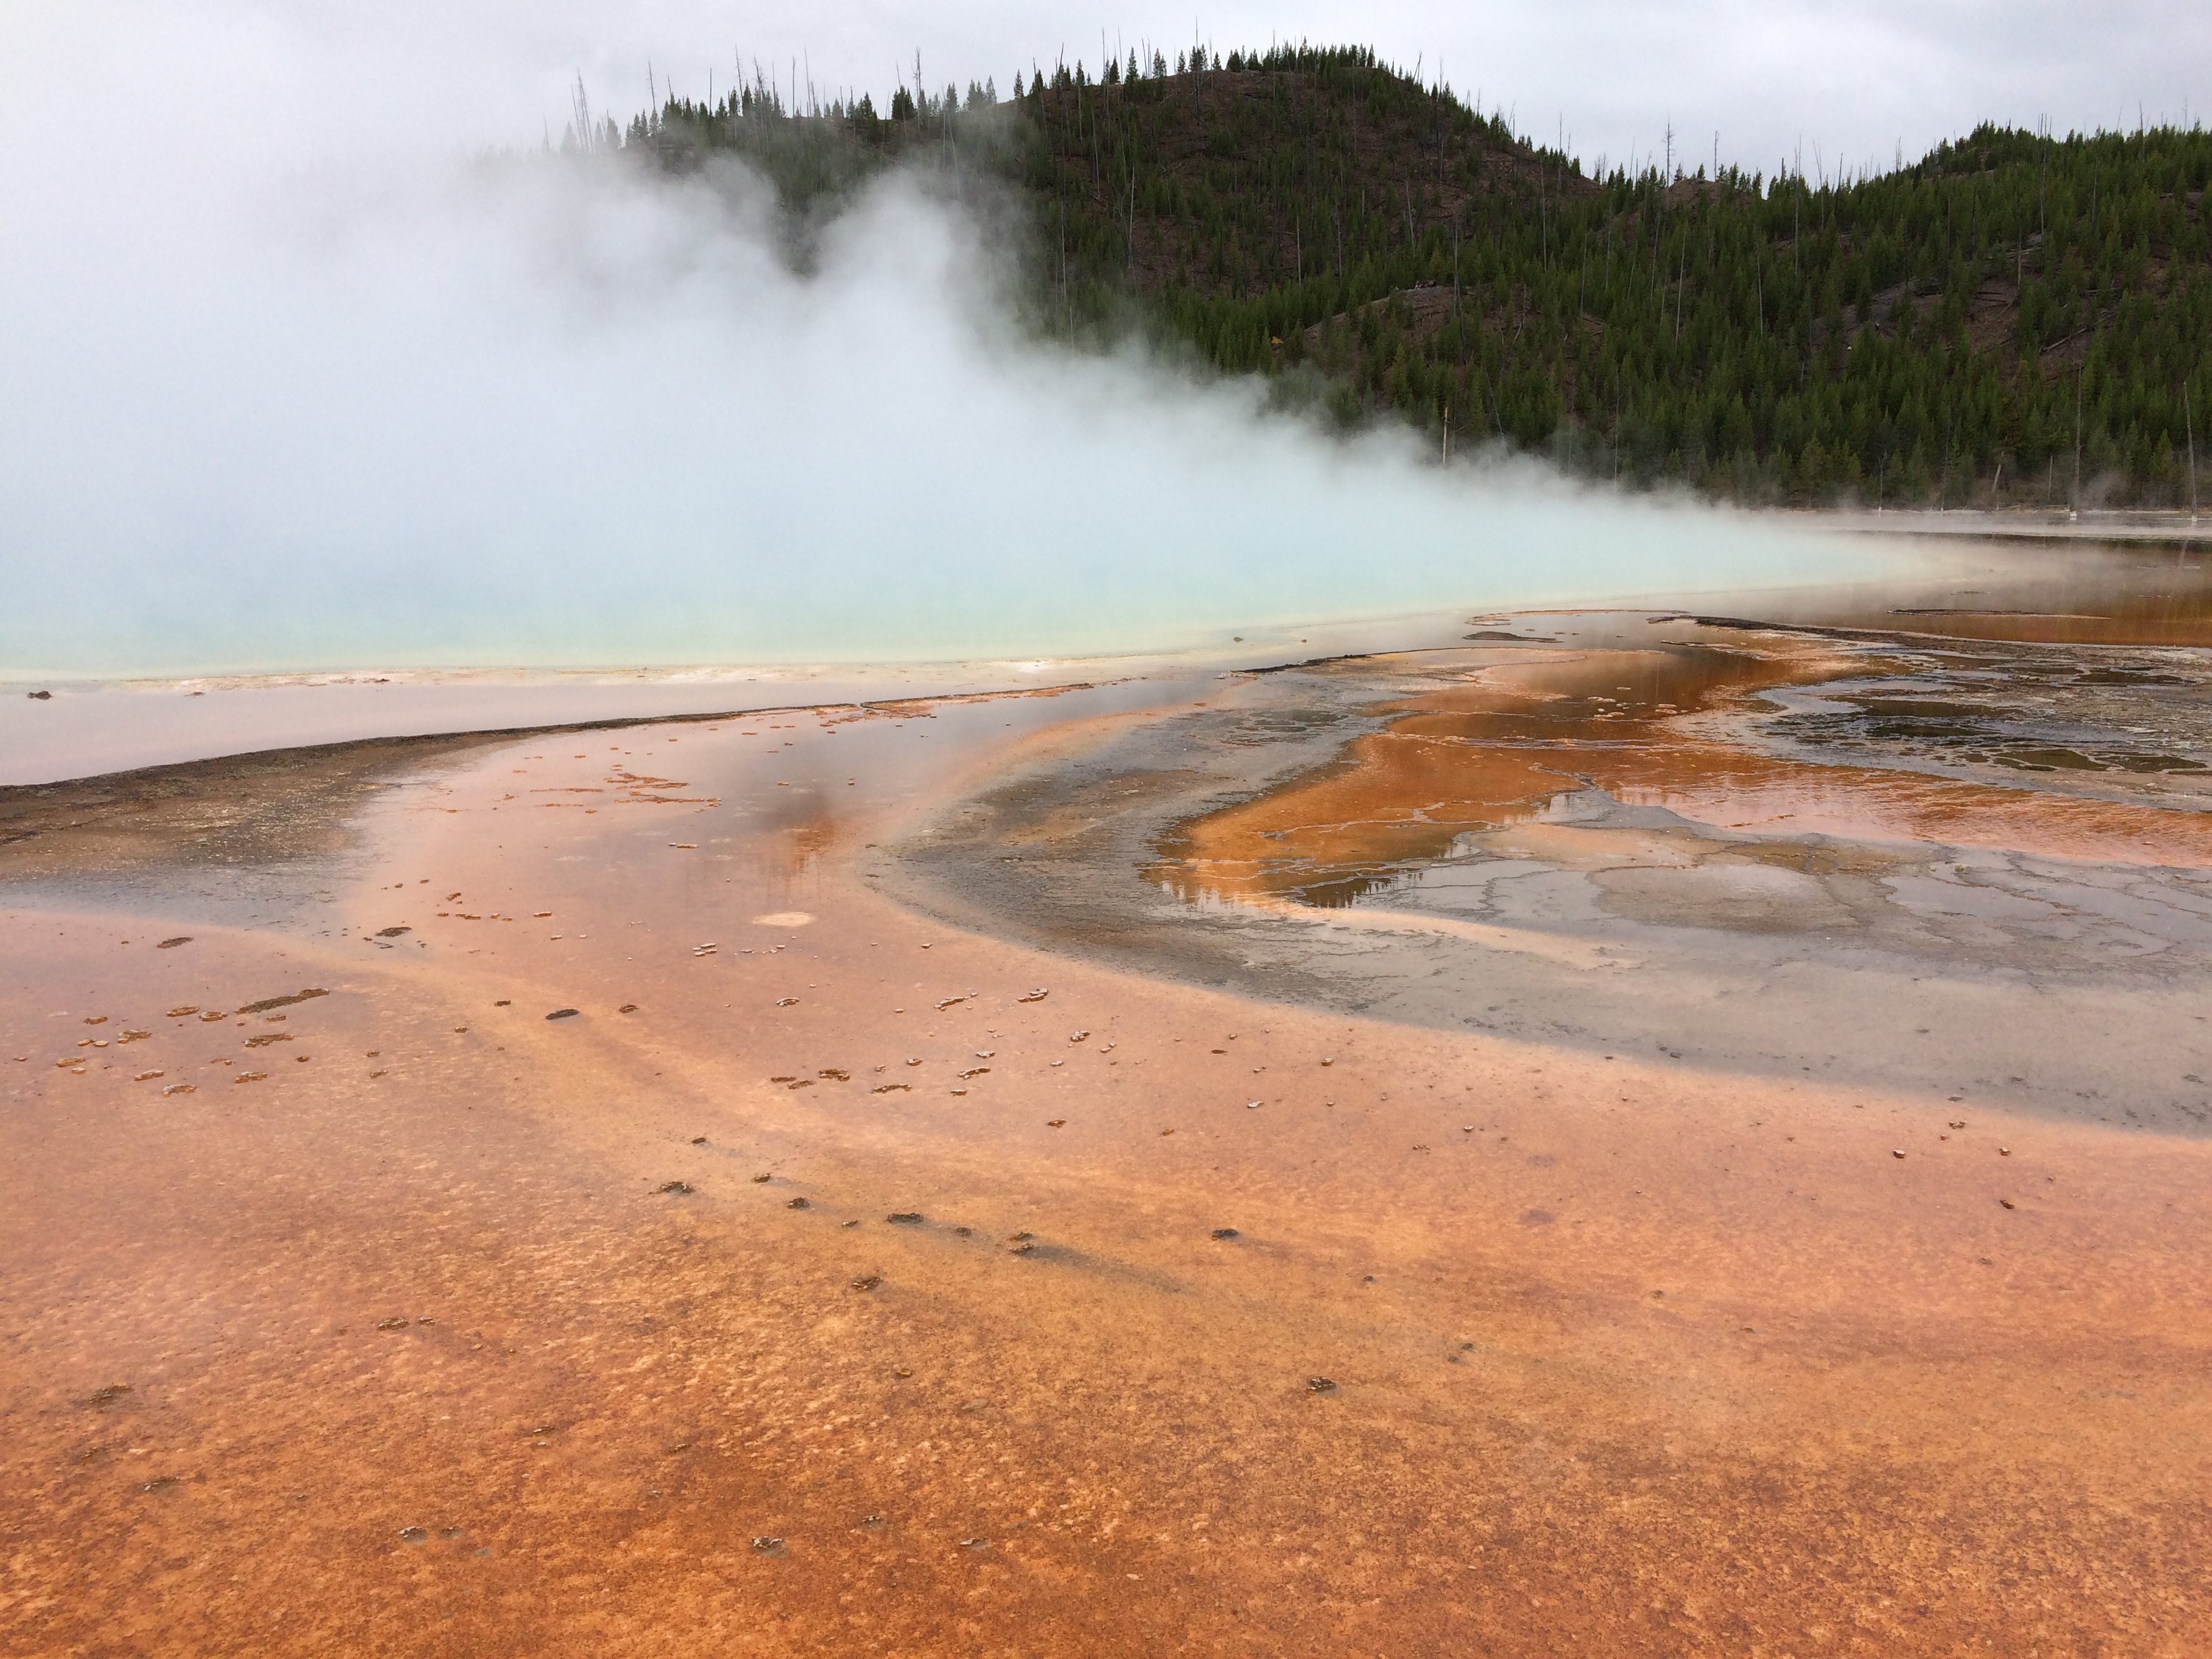 An orange bacterial mat in Yellowstone National Park. Steam rises from a hot spring in the background.